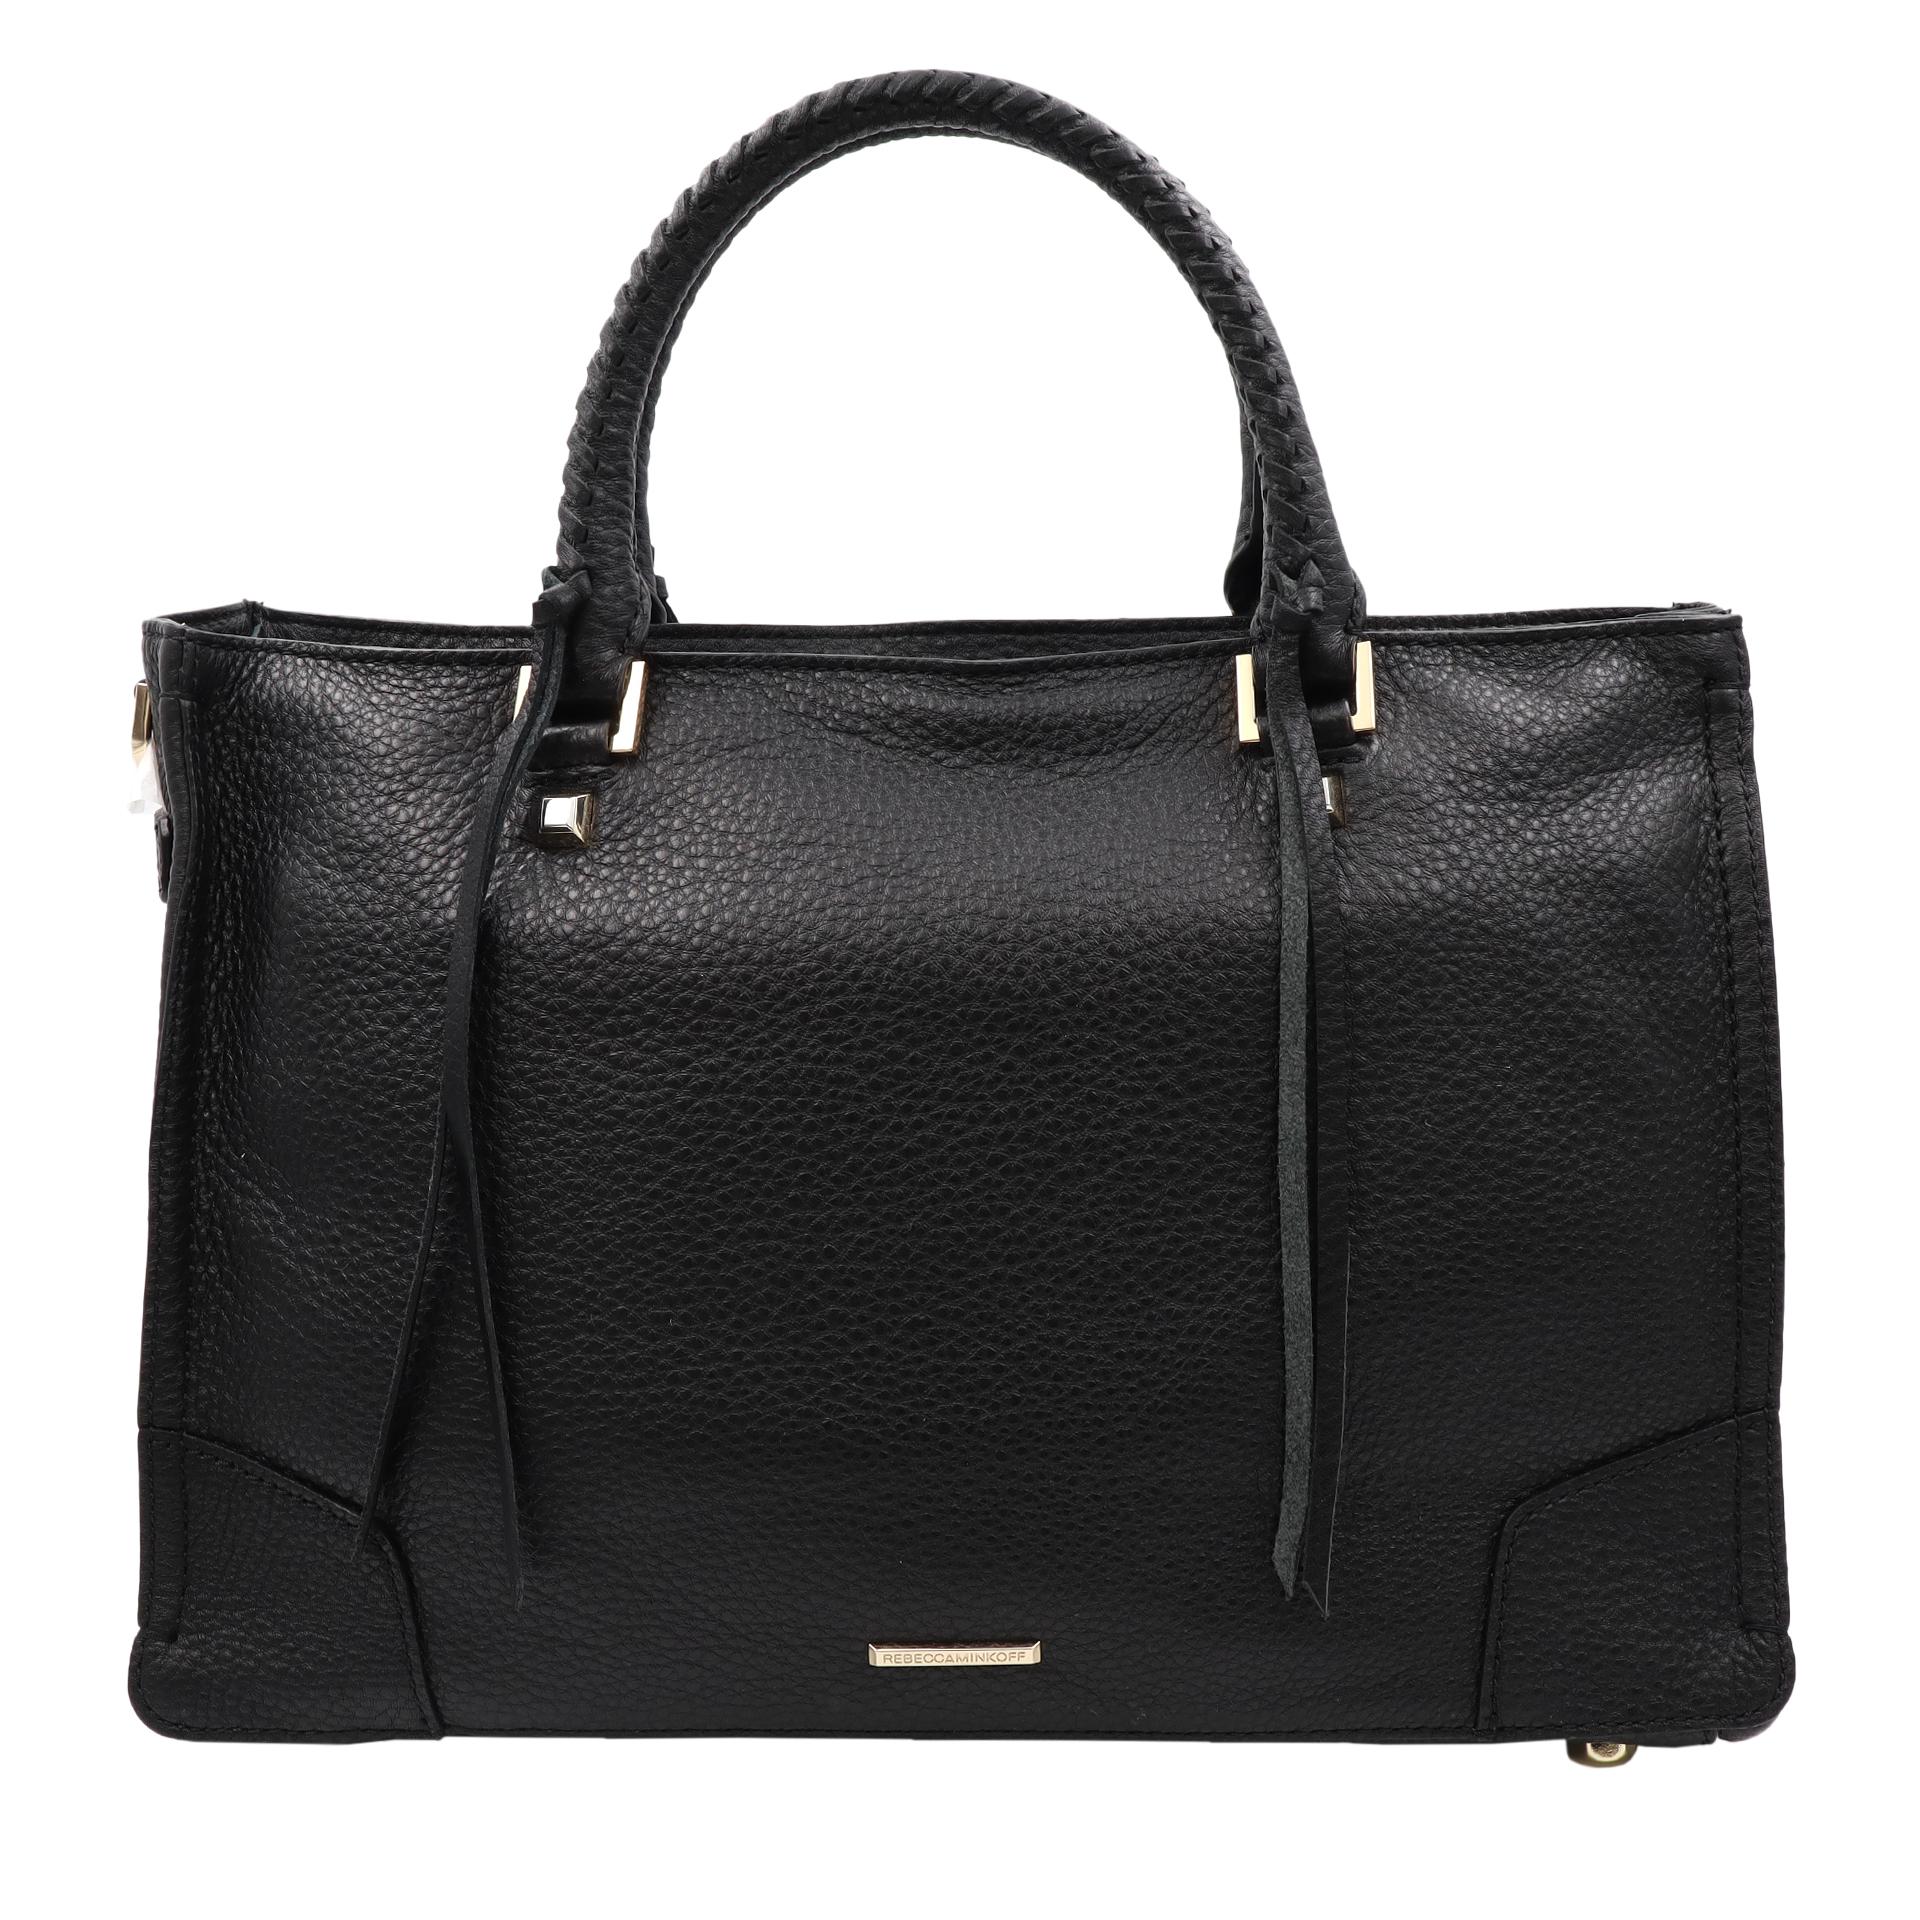 Black pebble leather and gold-tone hardware. The bag opens and closes with a zipper, has 1 exterior, 1 interior zip pocket and 3 interior slip pockets. This satchel has 5'' drop double handle and detachable/adjustable up to 23'' strap. Dimensions: